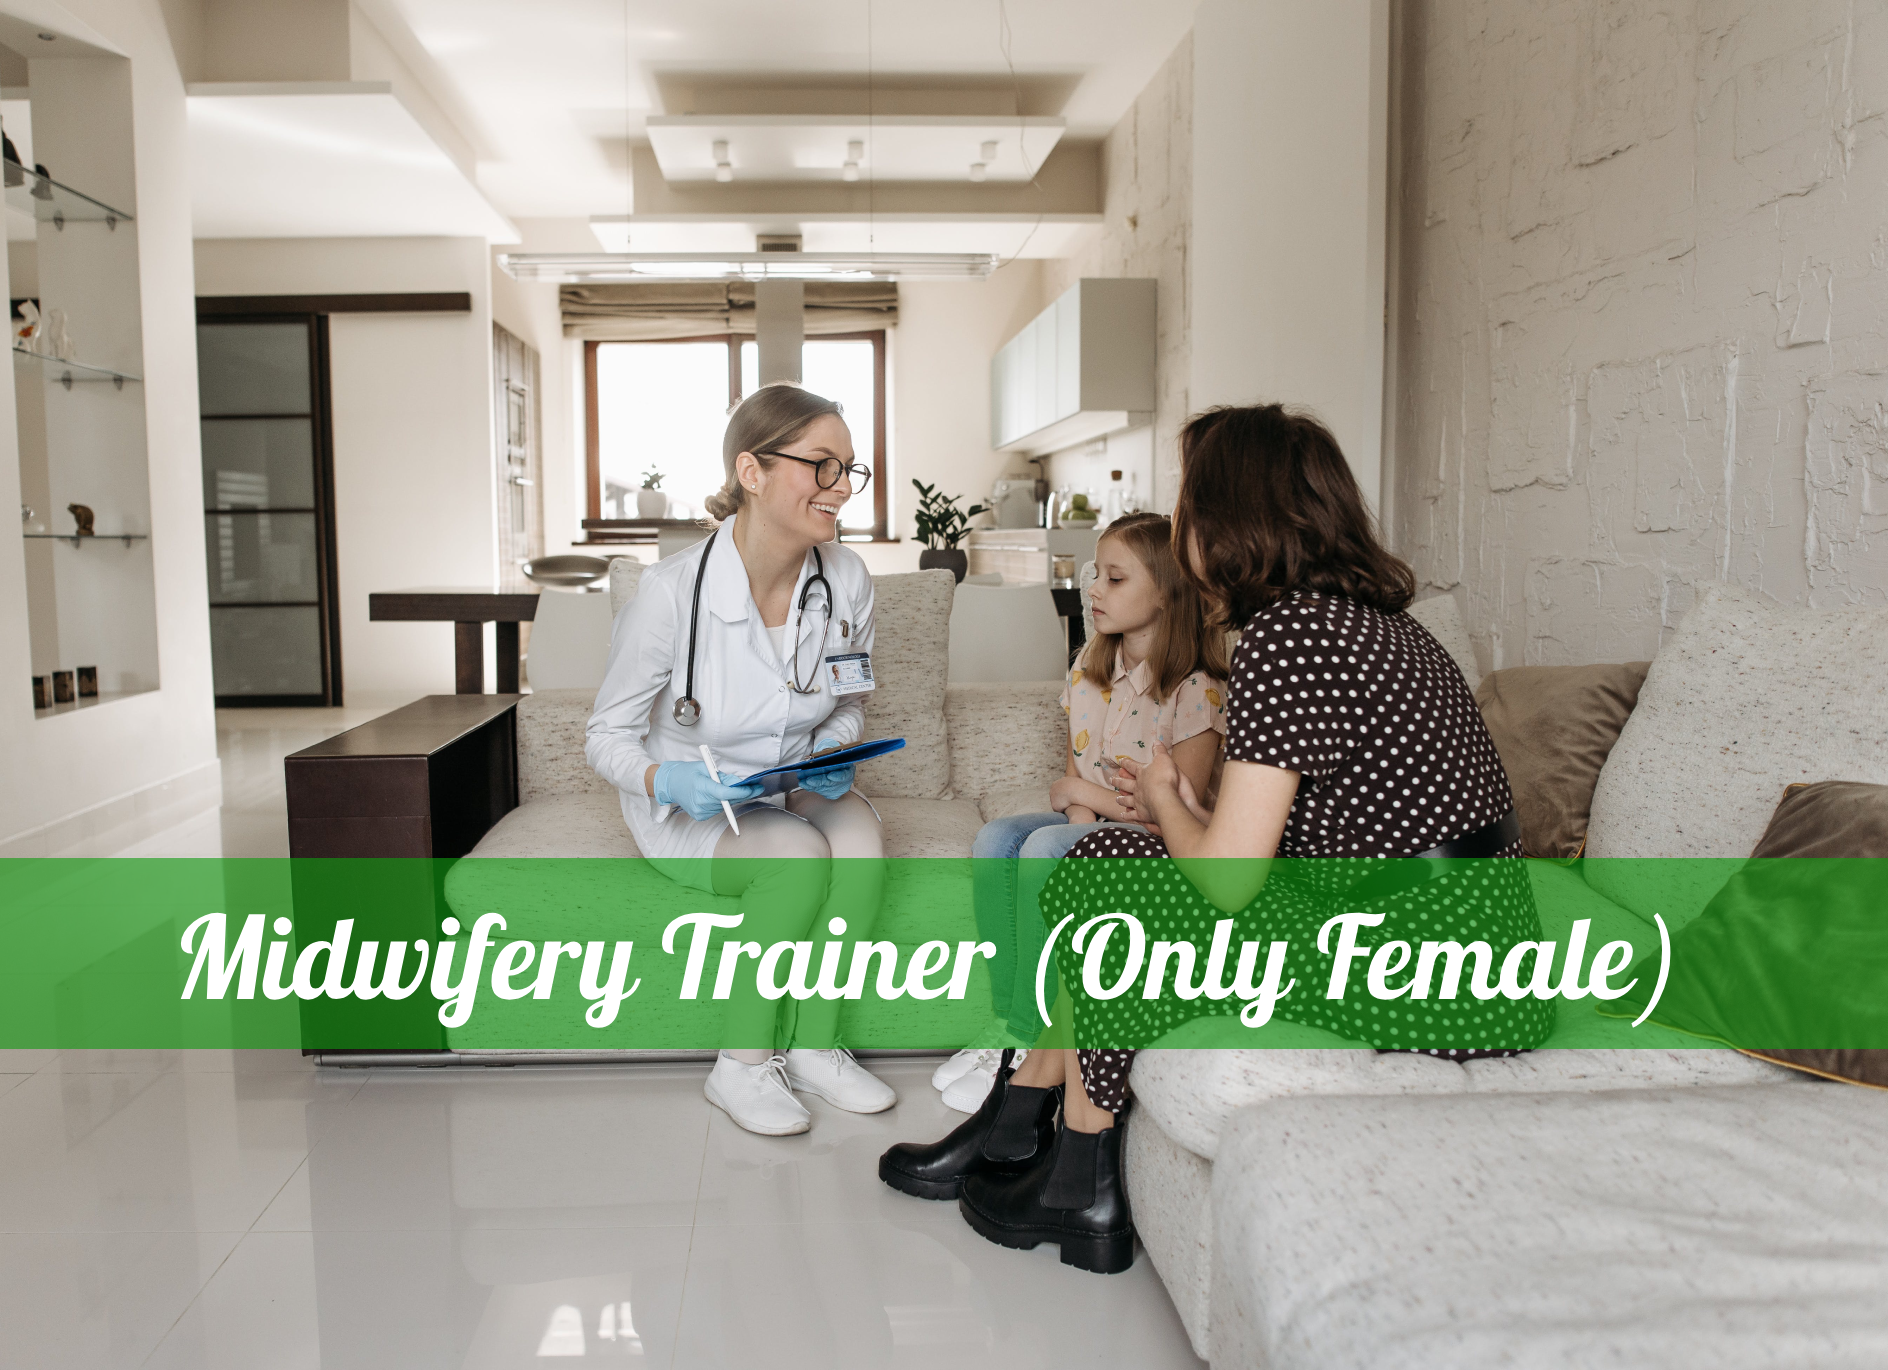 Midwifery Trainer (Only Female)